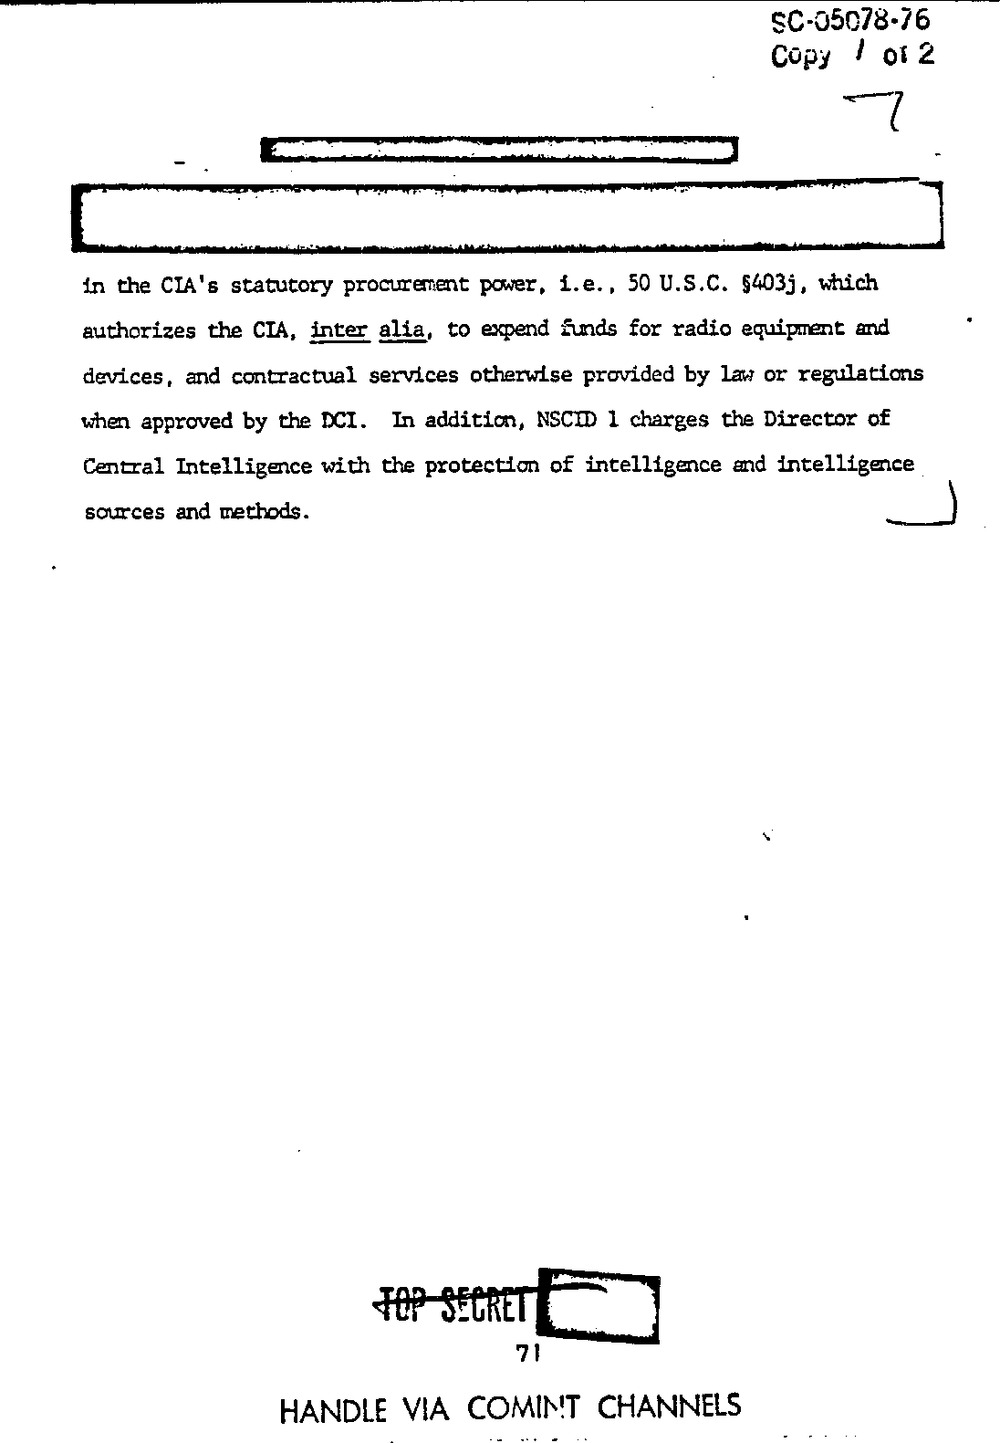 Page 79 from Report on Inquiry Into CIA Related Electronic Surveillance Activities